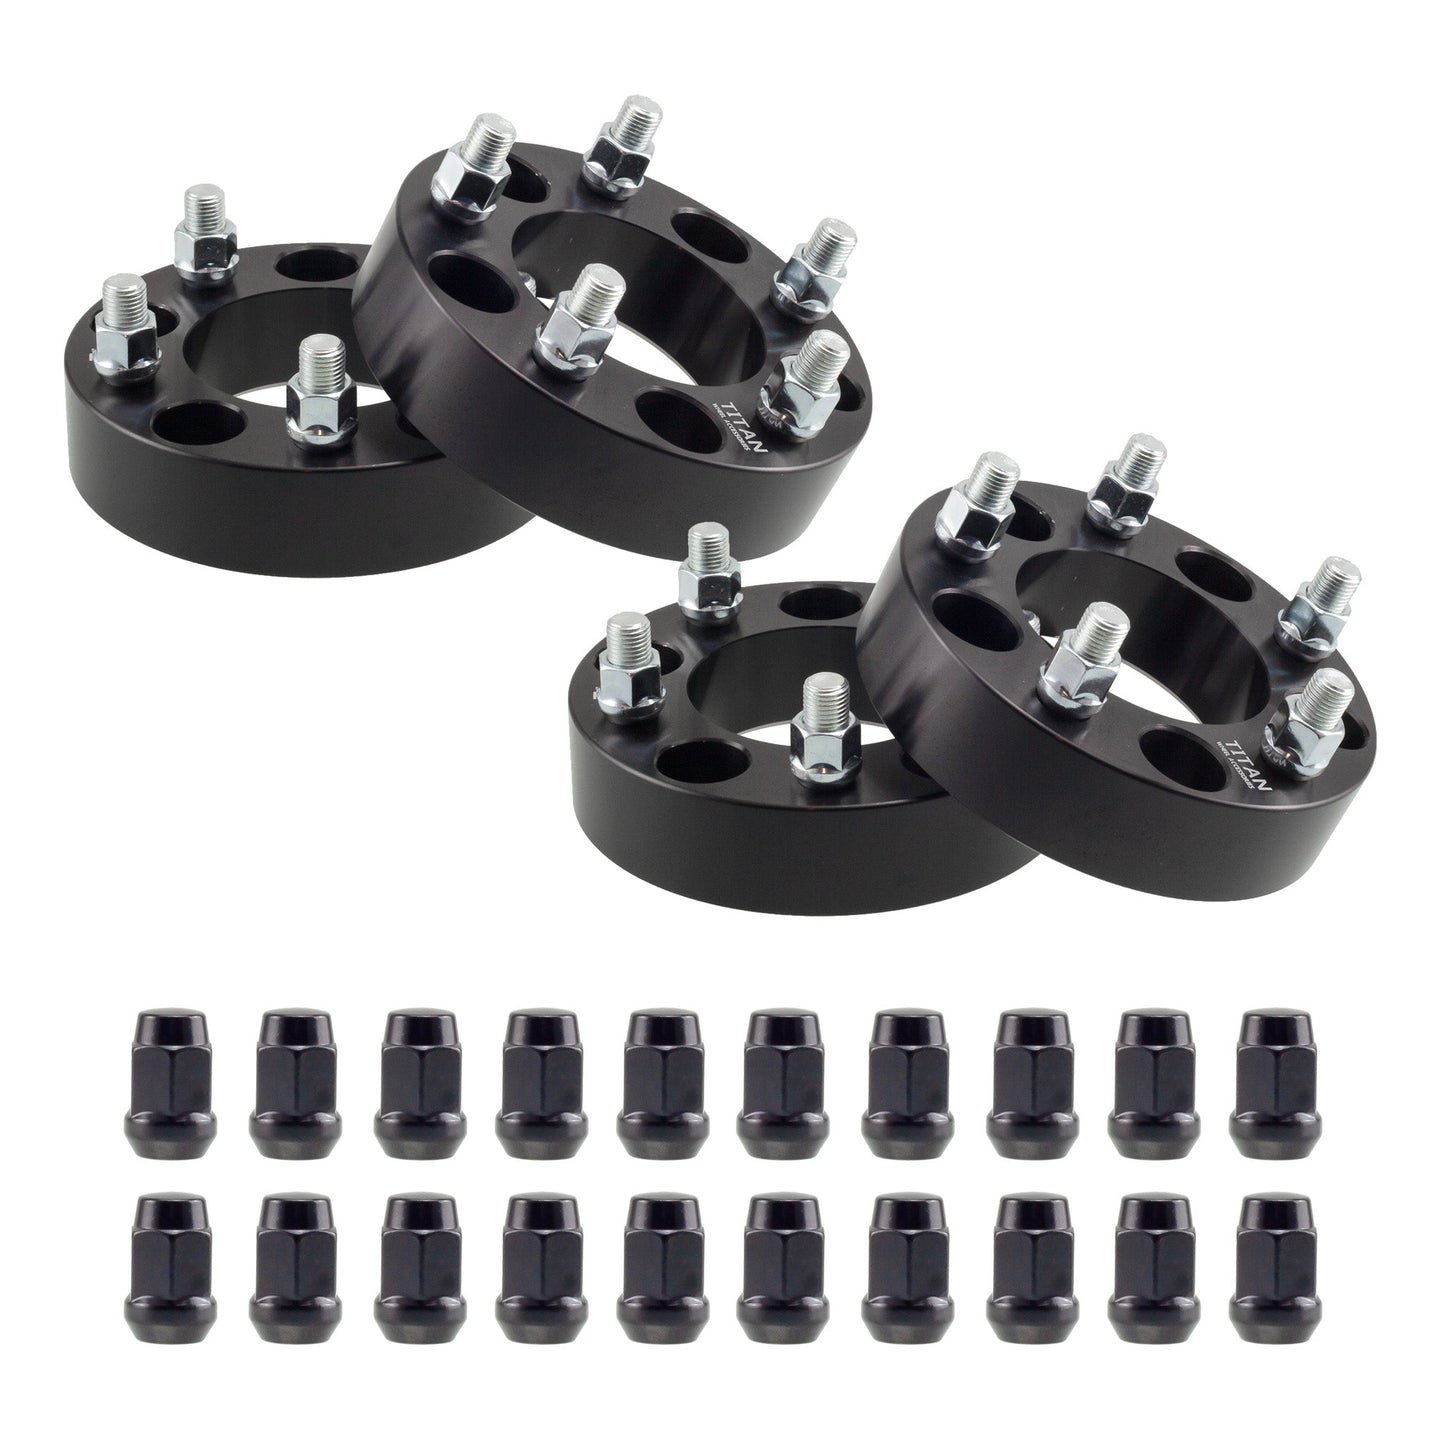 2" (50mm) Wheel Spacers for Dodge Charger Challenger Magnum Chrysler 300 | 5x4.5 (5x114.3) | 71.5 Hubcentric |14x1.5 Studs |